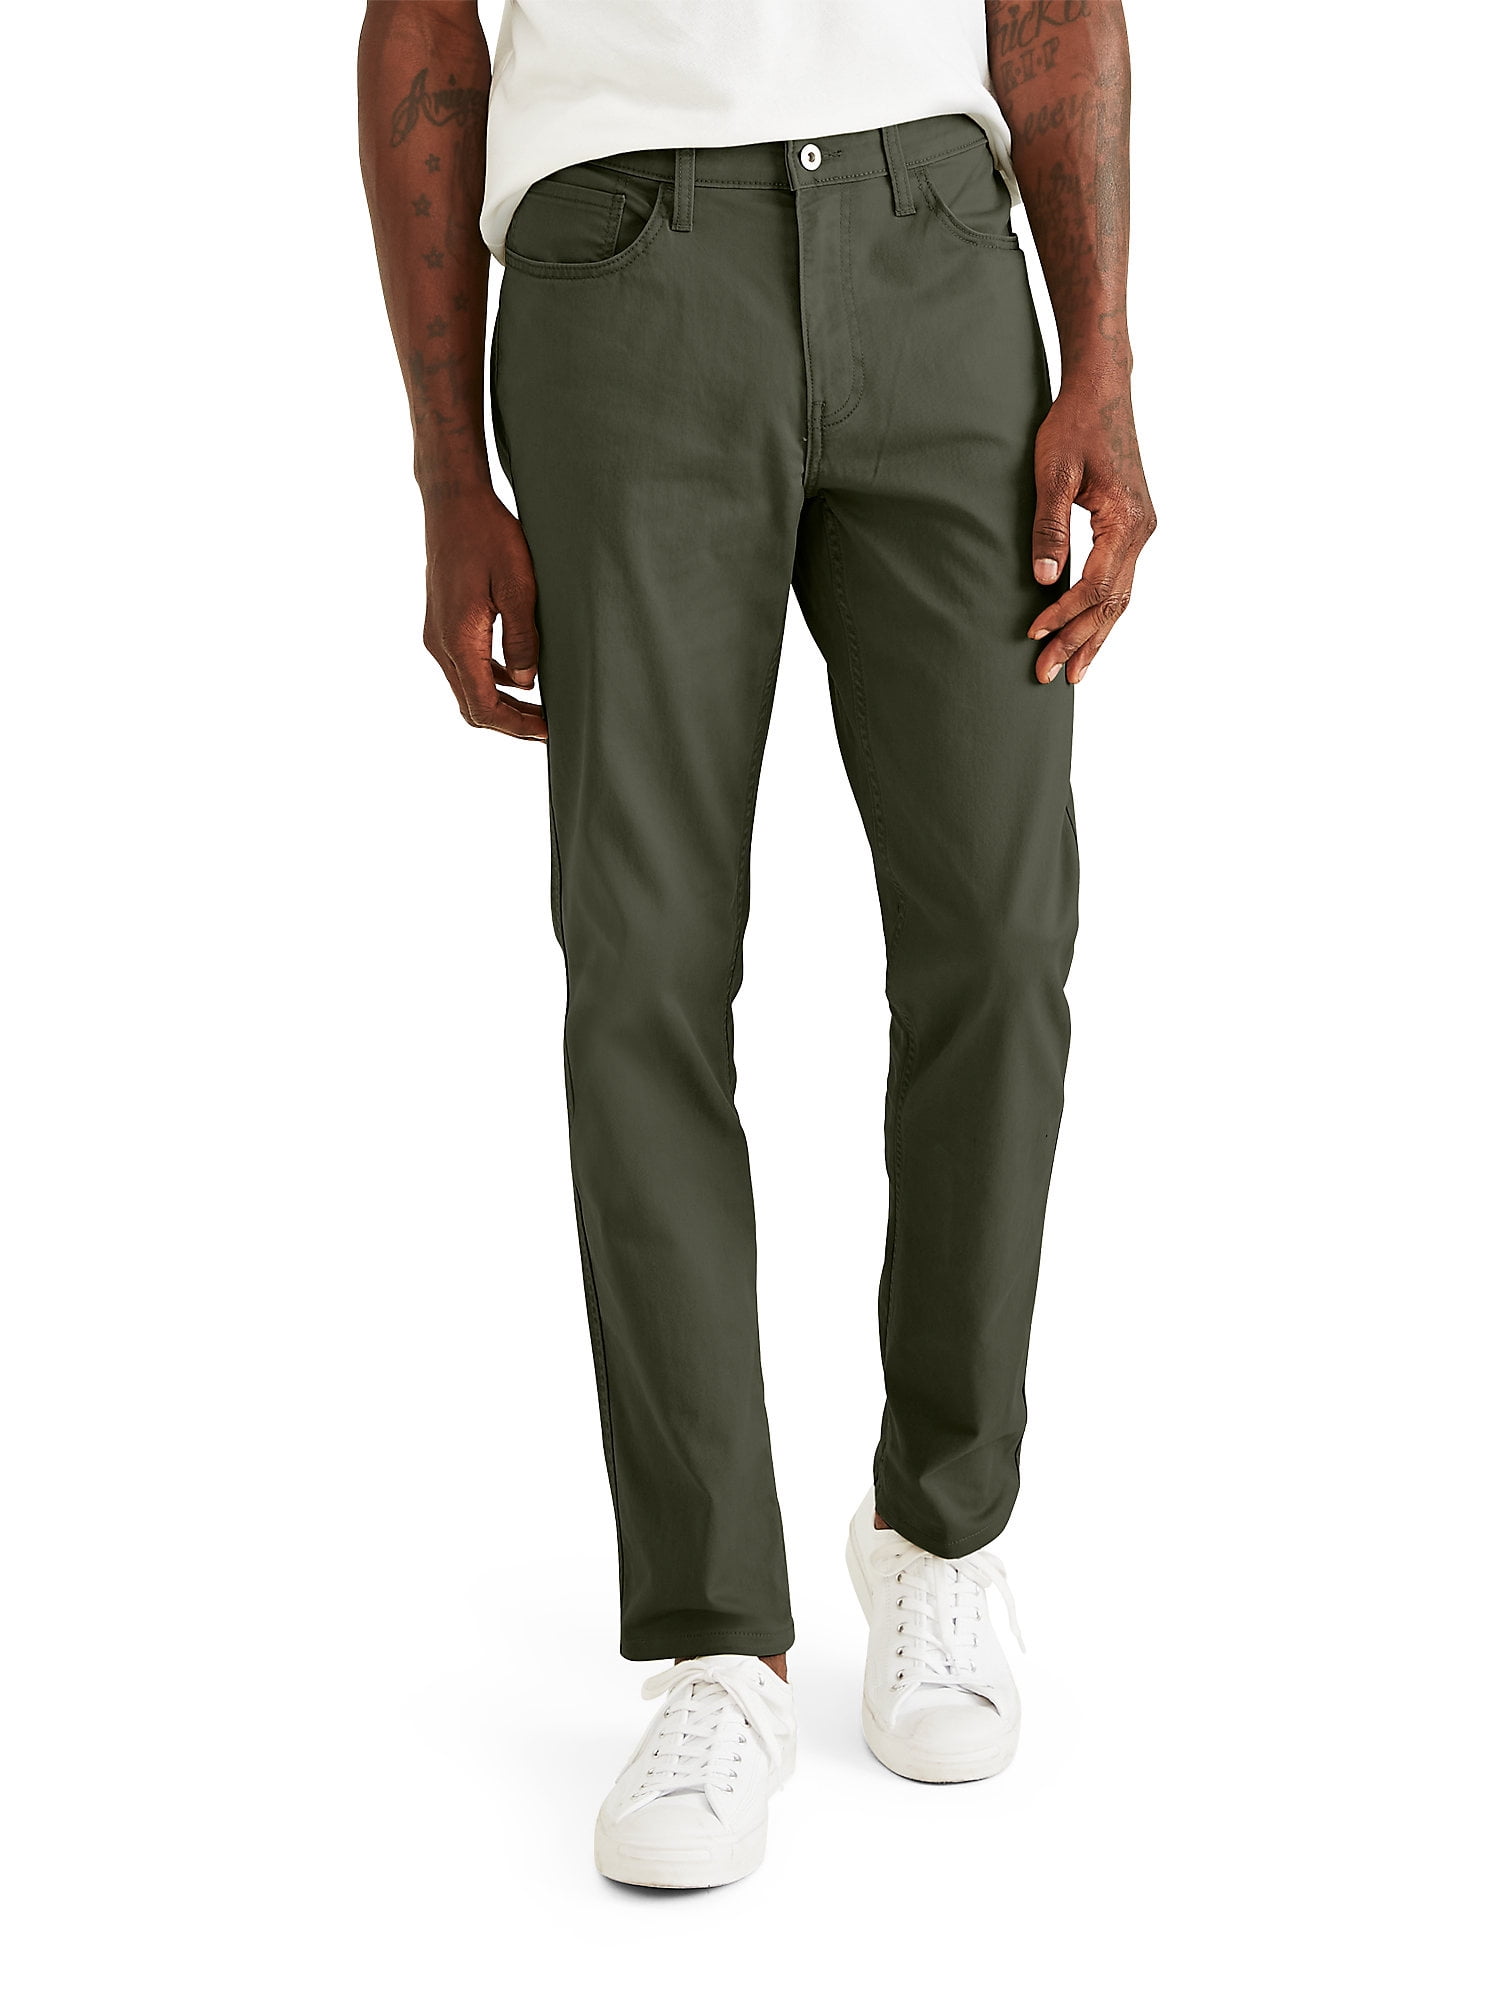 Mens Dockers Straight Fit Flat Front No iron Dress Pants Tailored Collection 